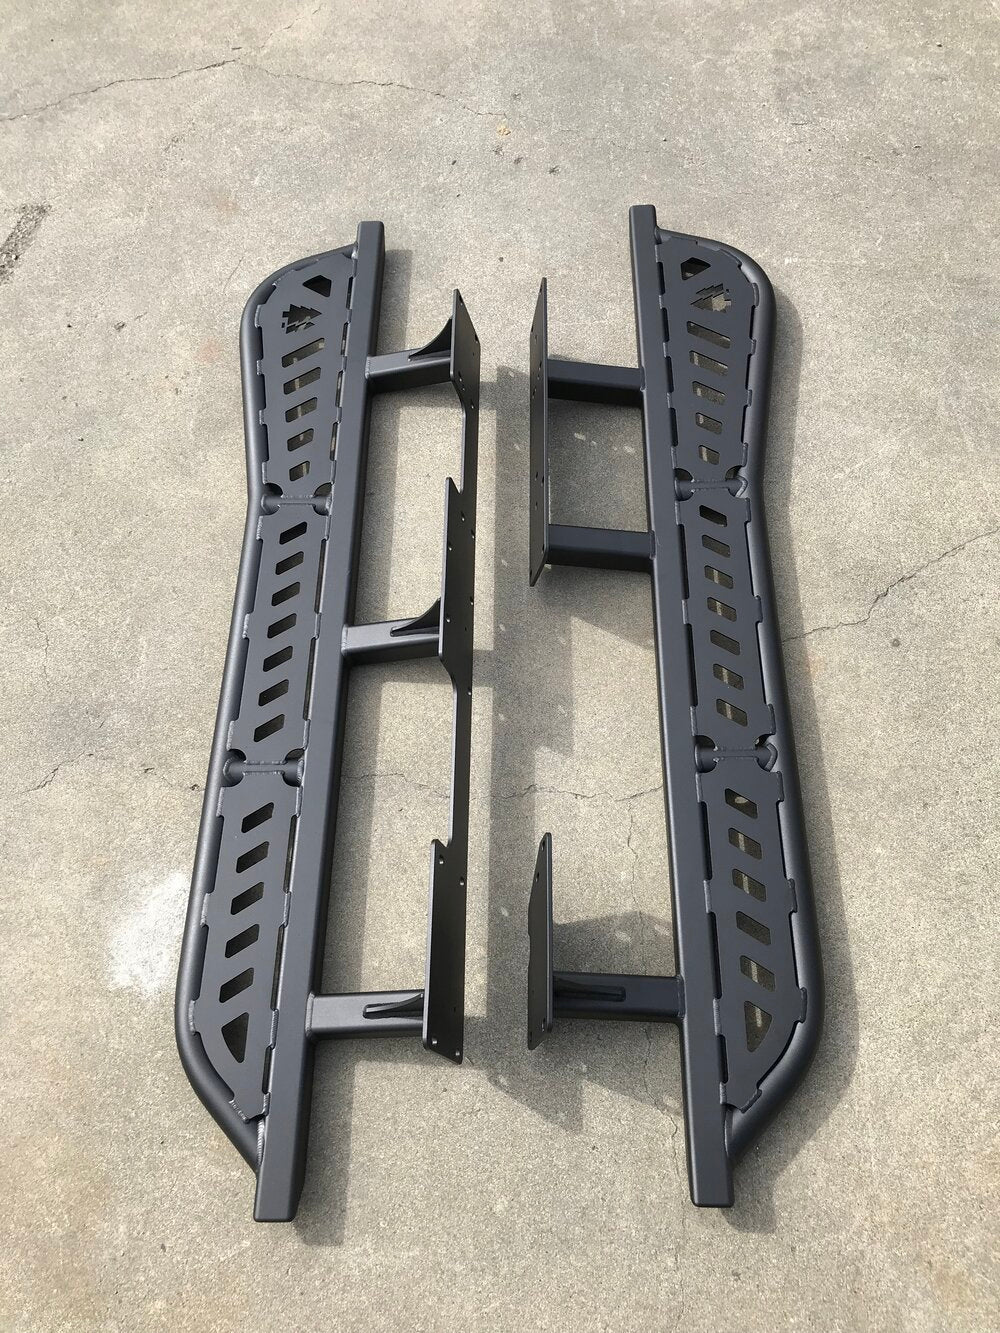 Greenlane Offroad Hybrid Sliders with Bump Out - 5th Gen 4Runner